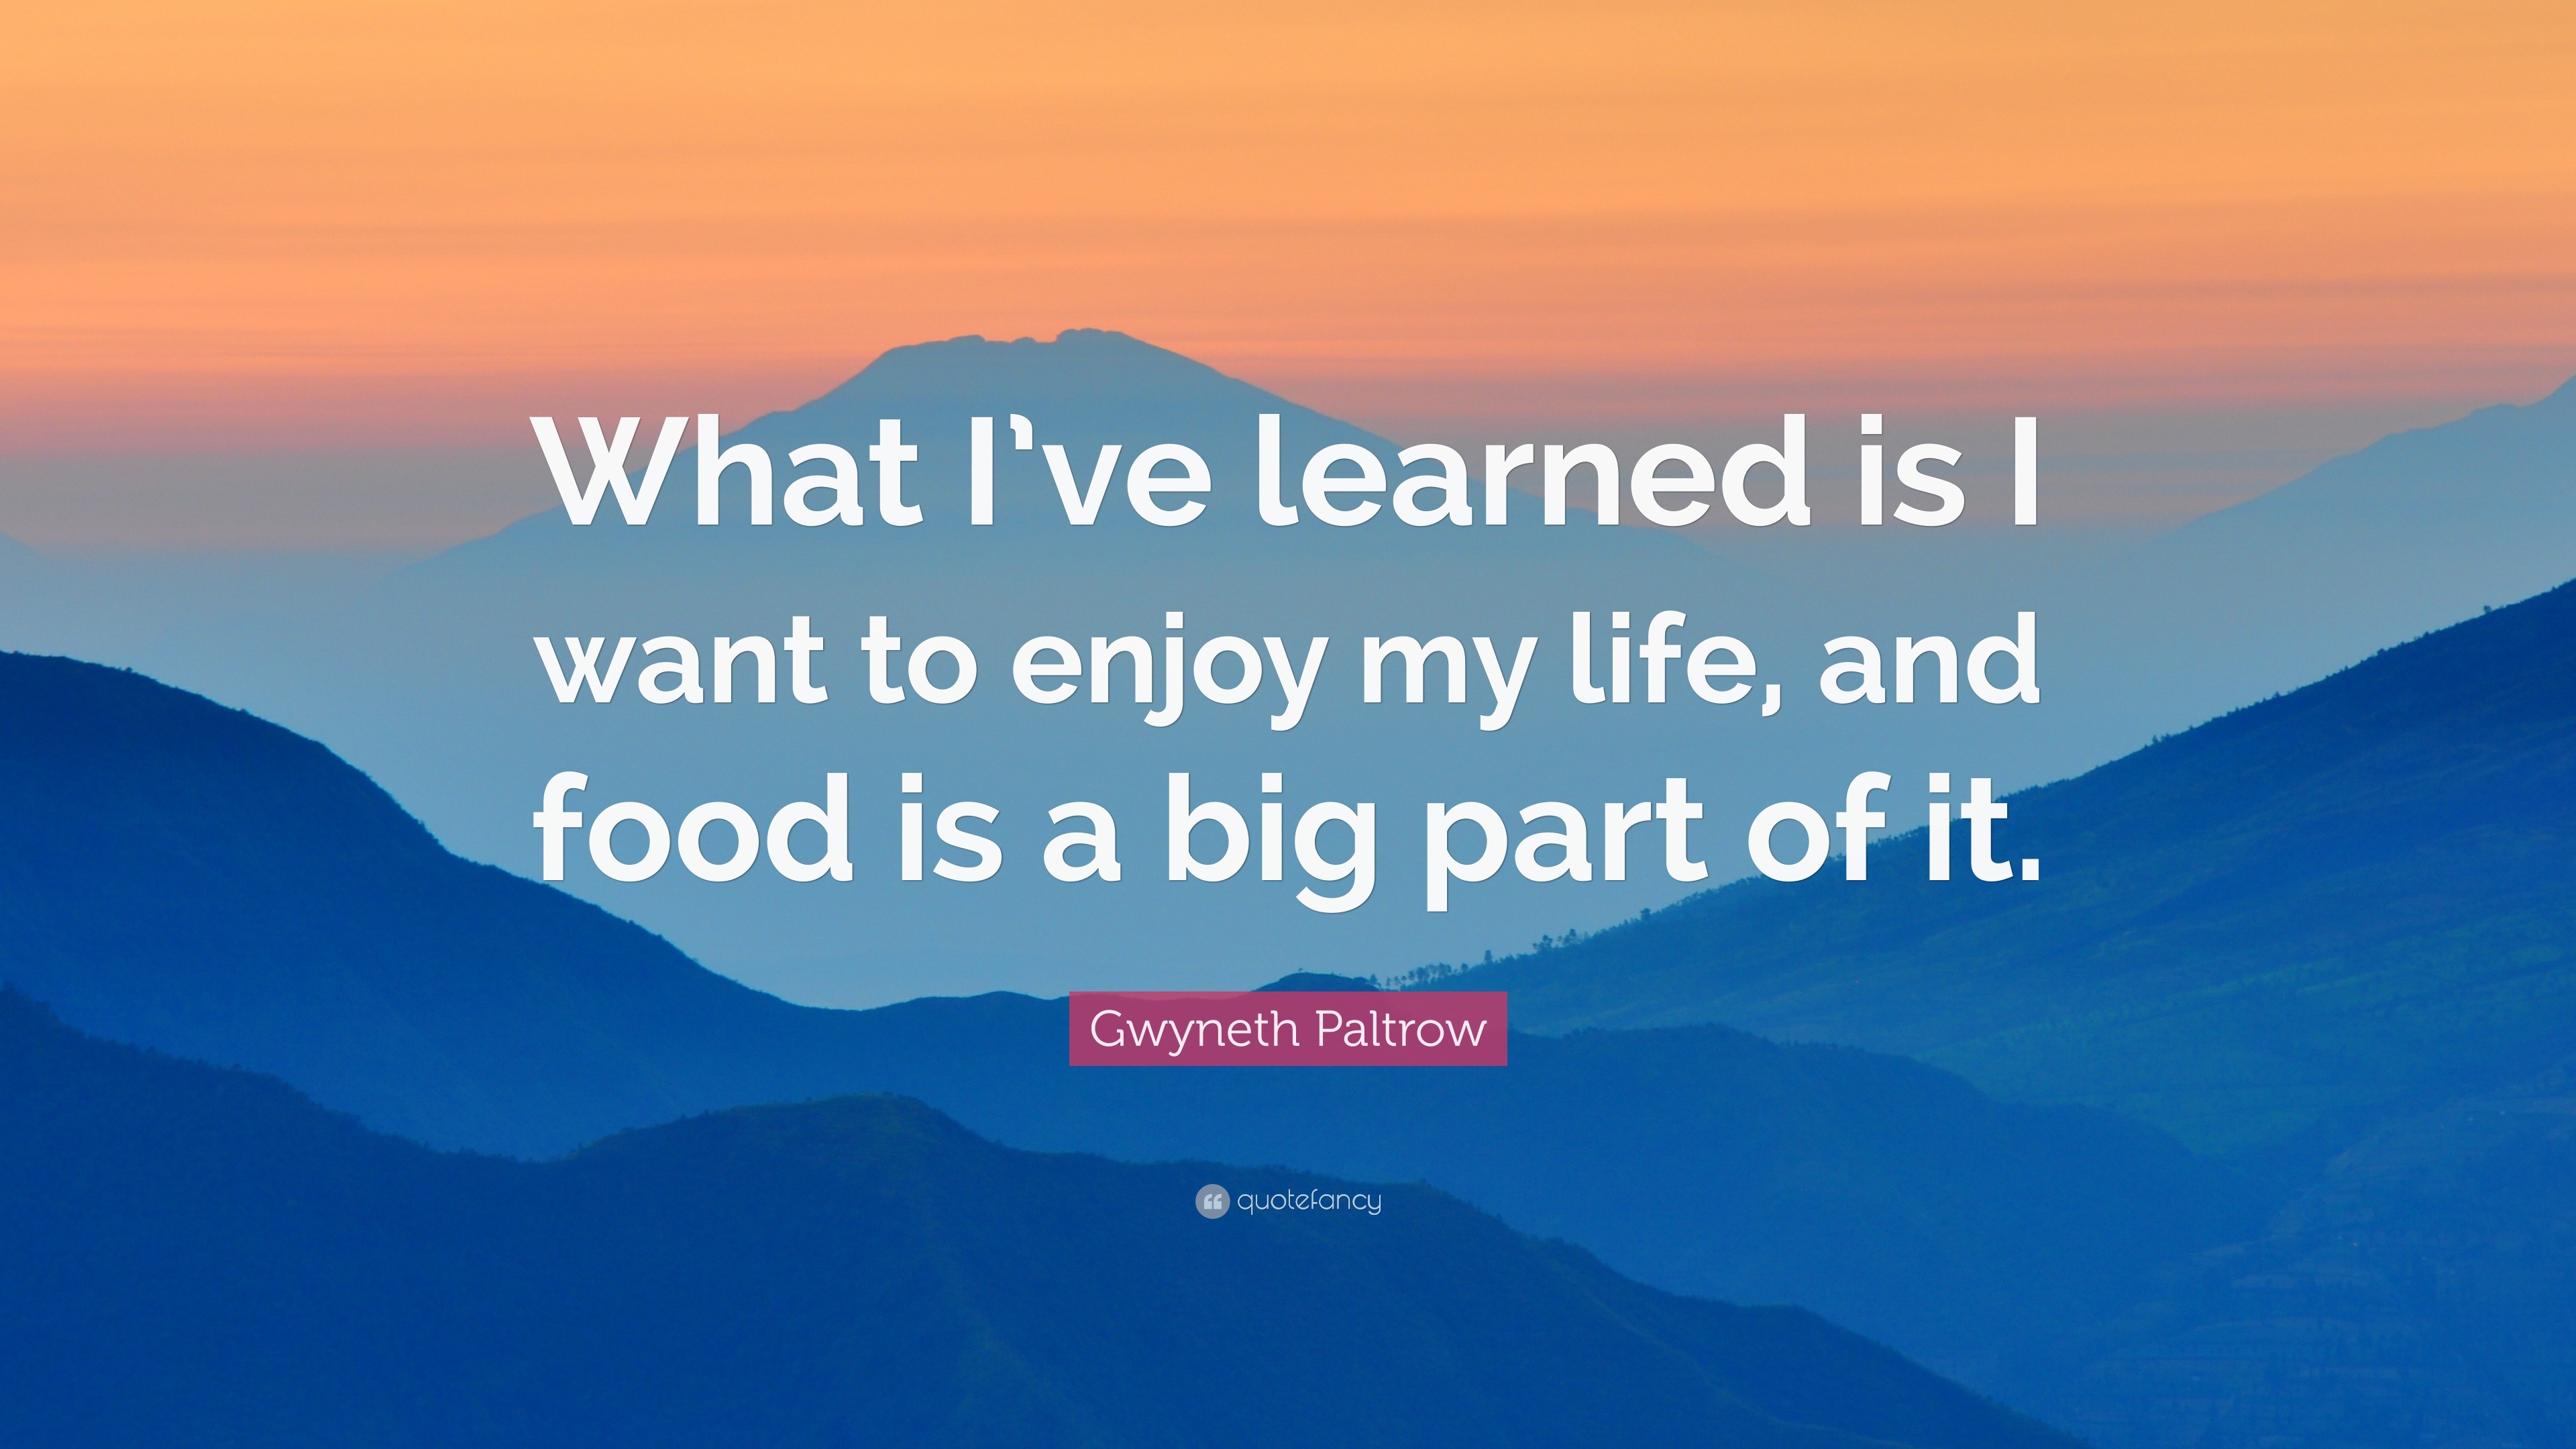 Gwyneth Paltrow Quote “What I ve learned is I want to enjoy my